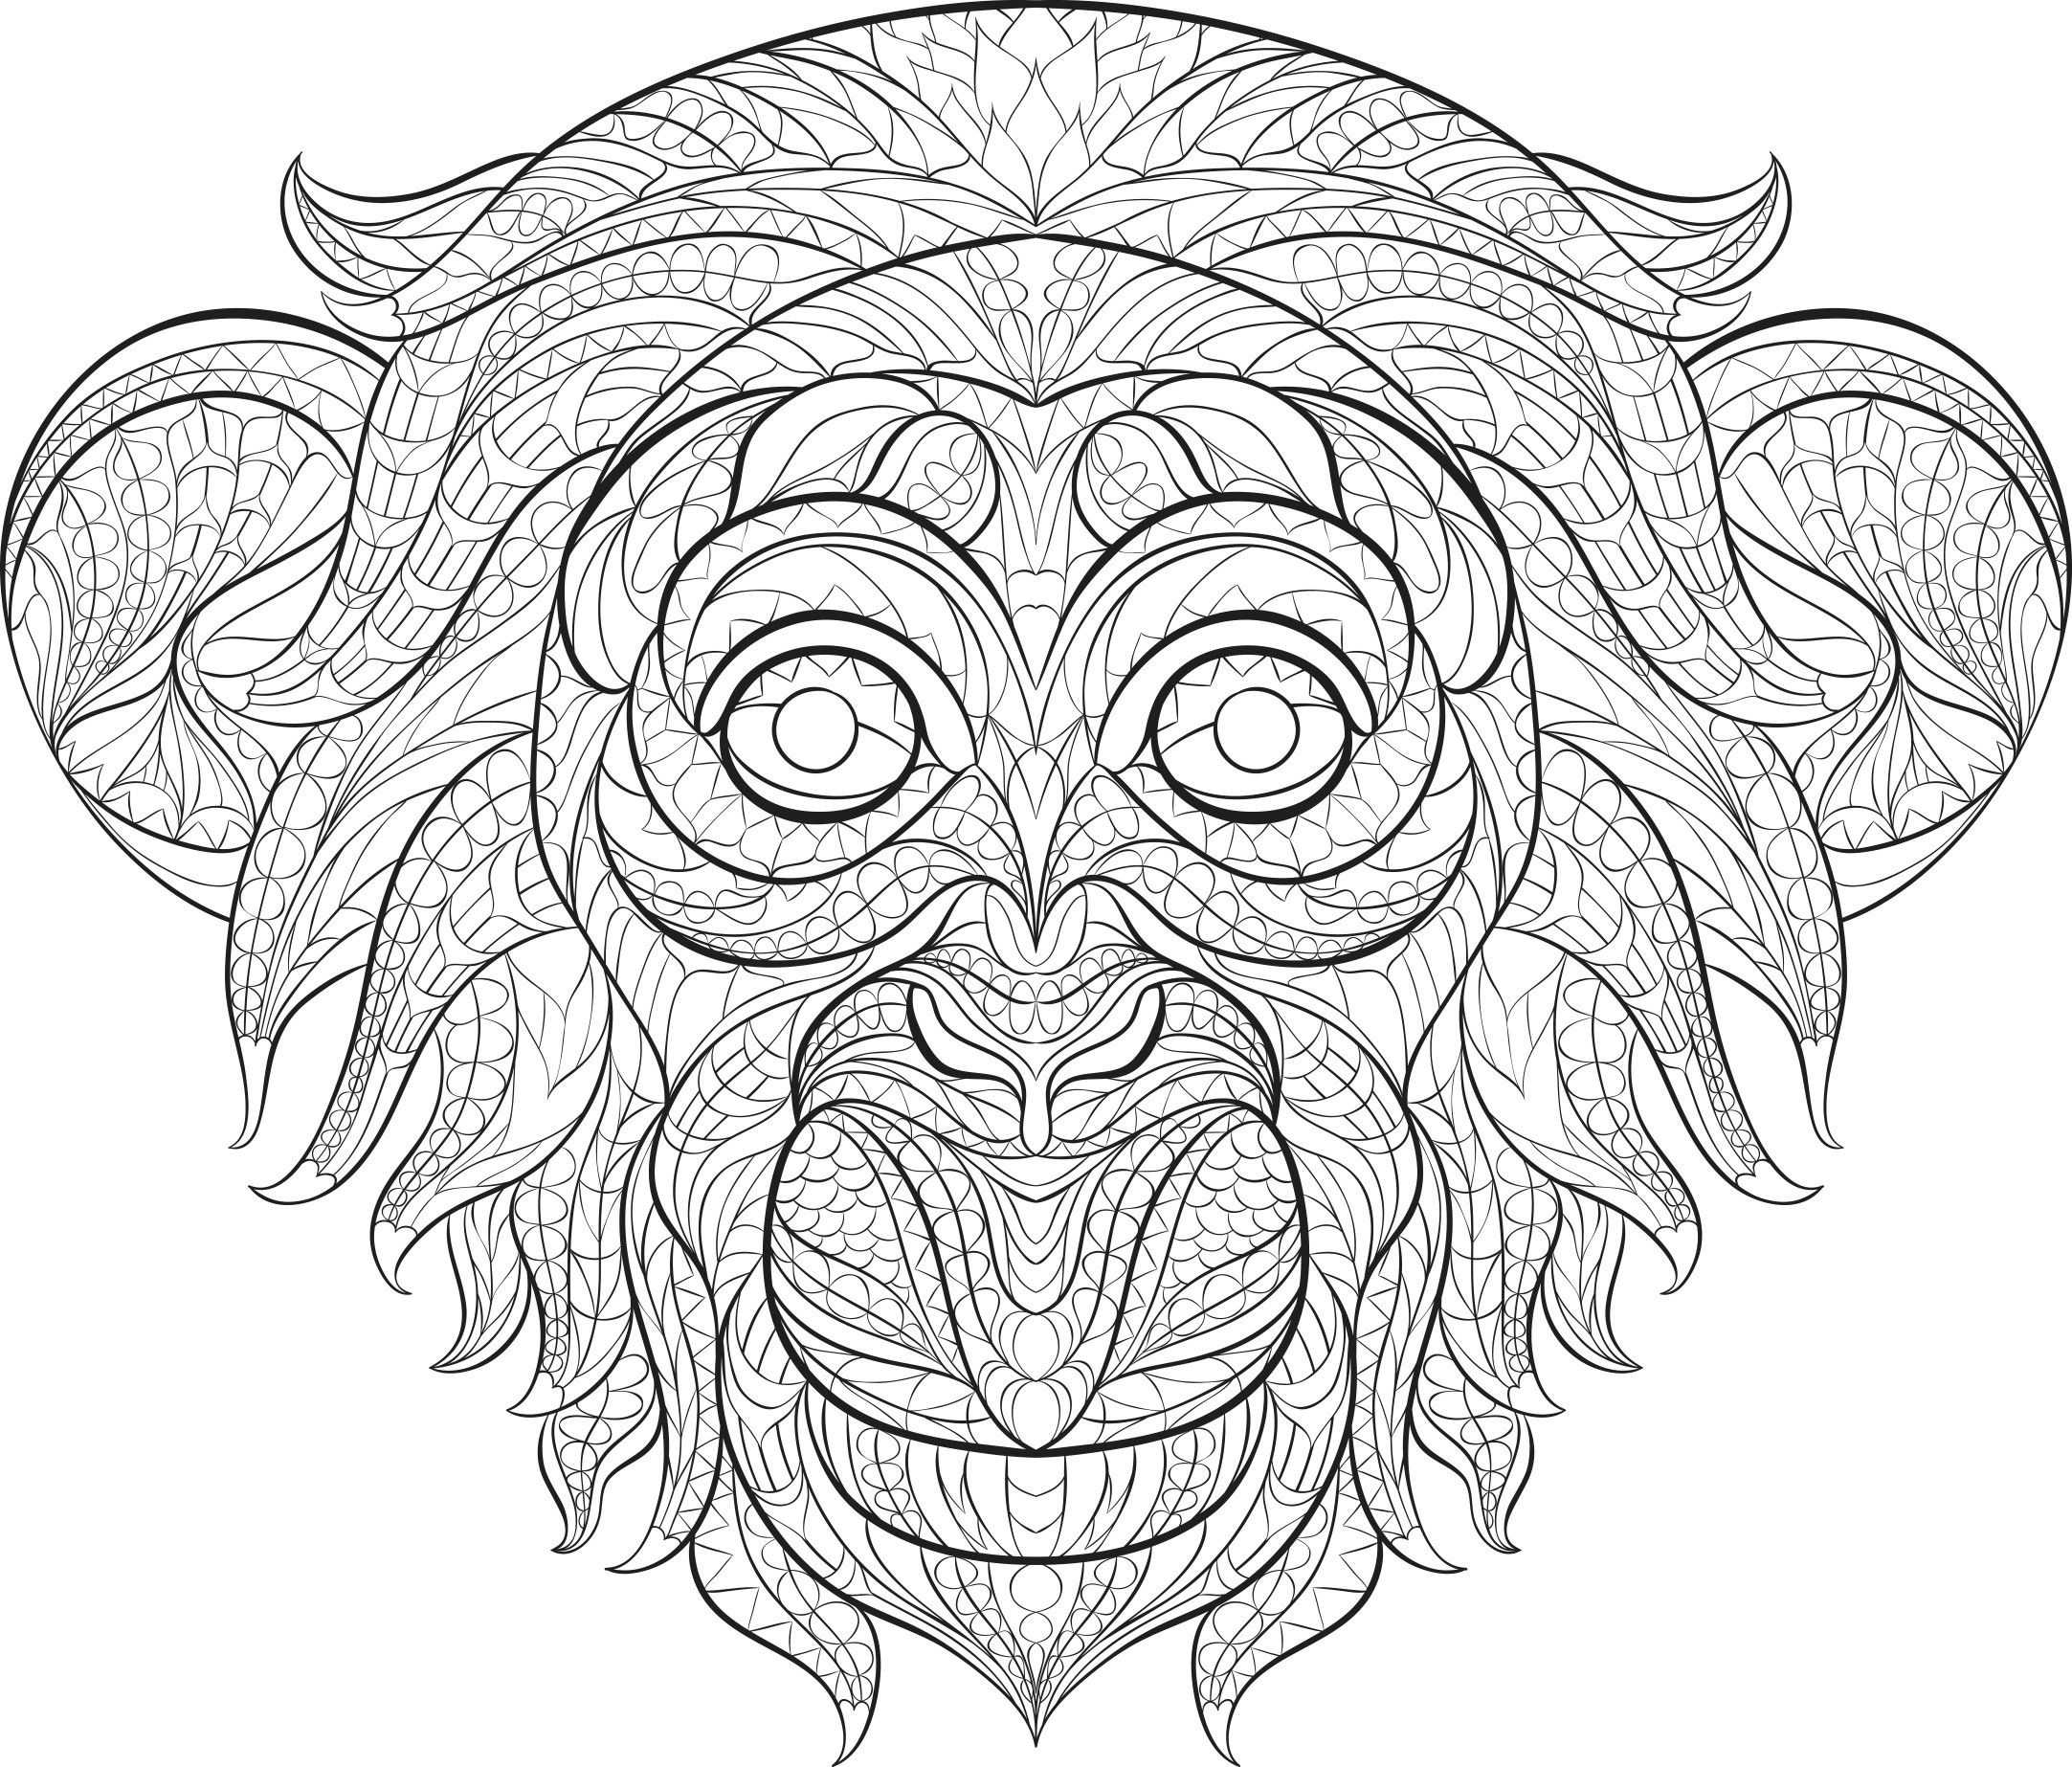 Cool Animal Coloring Pages
 Search Results for “Chinese New Year 2015 Colouring Pages